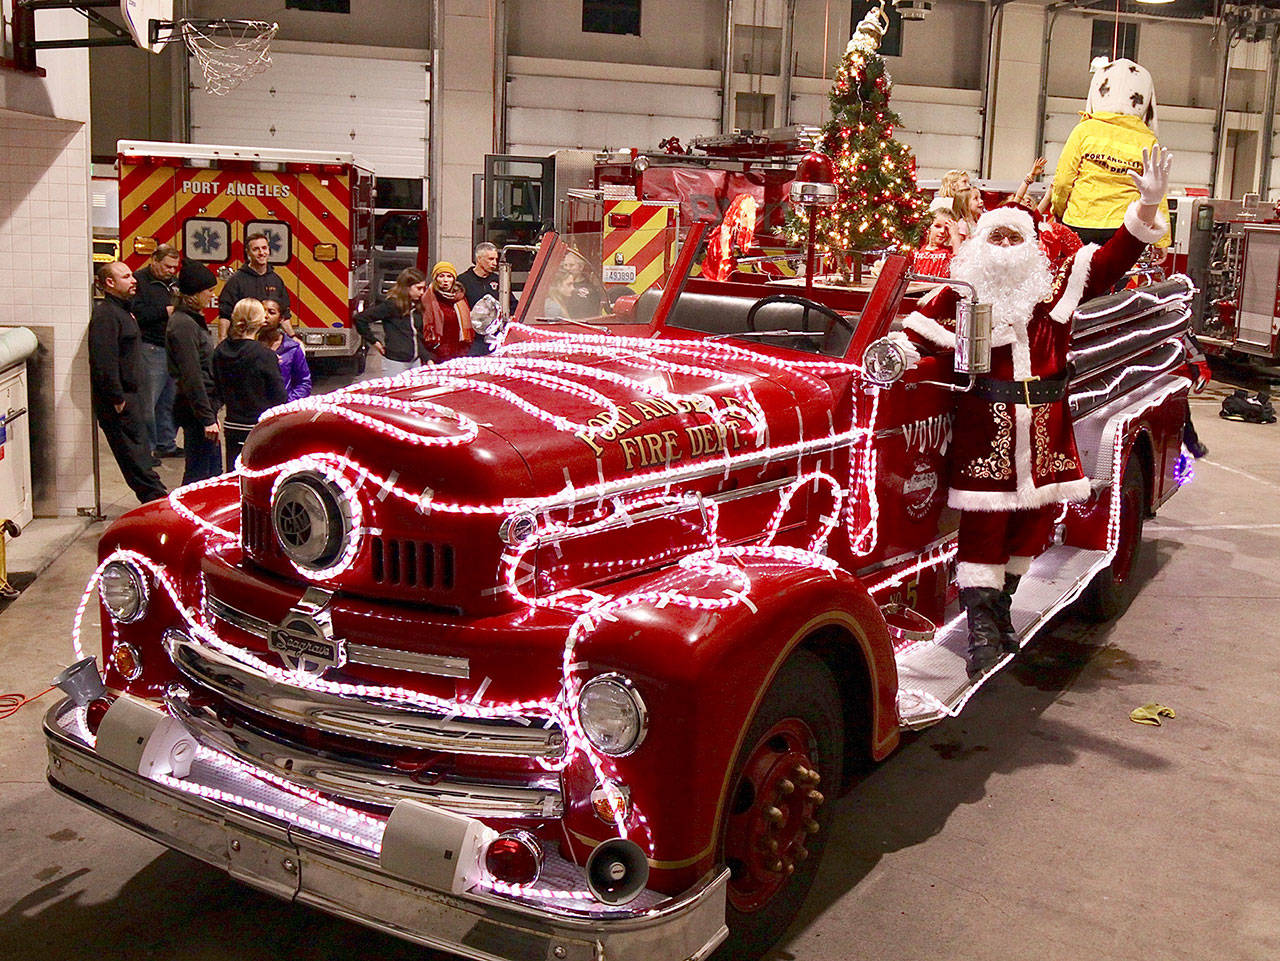 Firefighter Travis McFarland practices his Santa wave as the Port Angeles Fire Department’s 1956 Seagrave engine is decorated for Operation Candy Cane. (Dave Logan/for Peninsula Daily News)